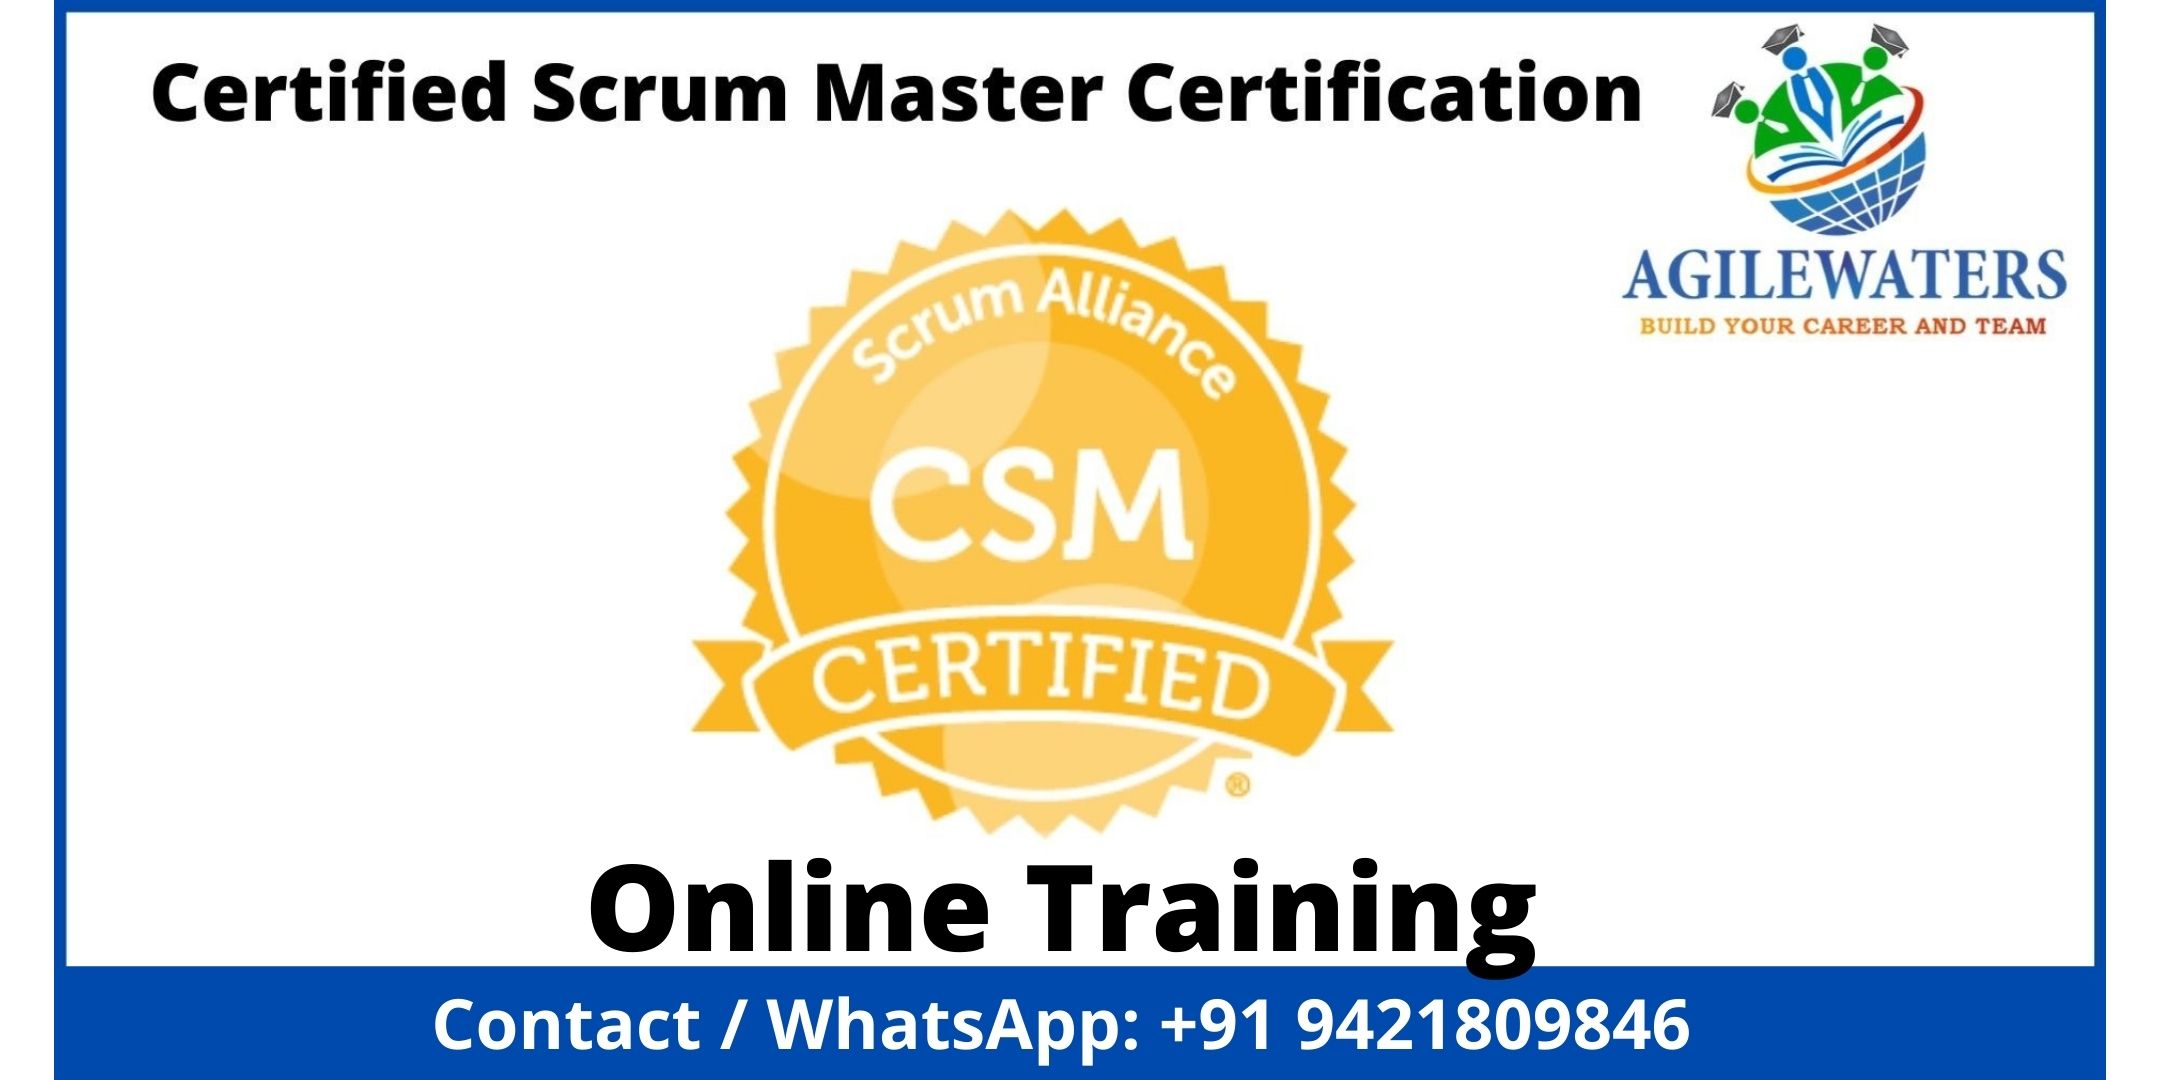 CSPO- Certified Scrum Product Owner CertificationEducation and LearningWorkshopsAll IndiaAnand Vihar Interstate Bus Terminal